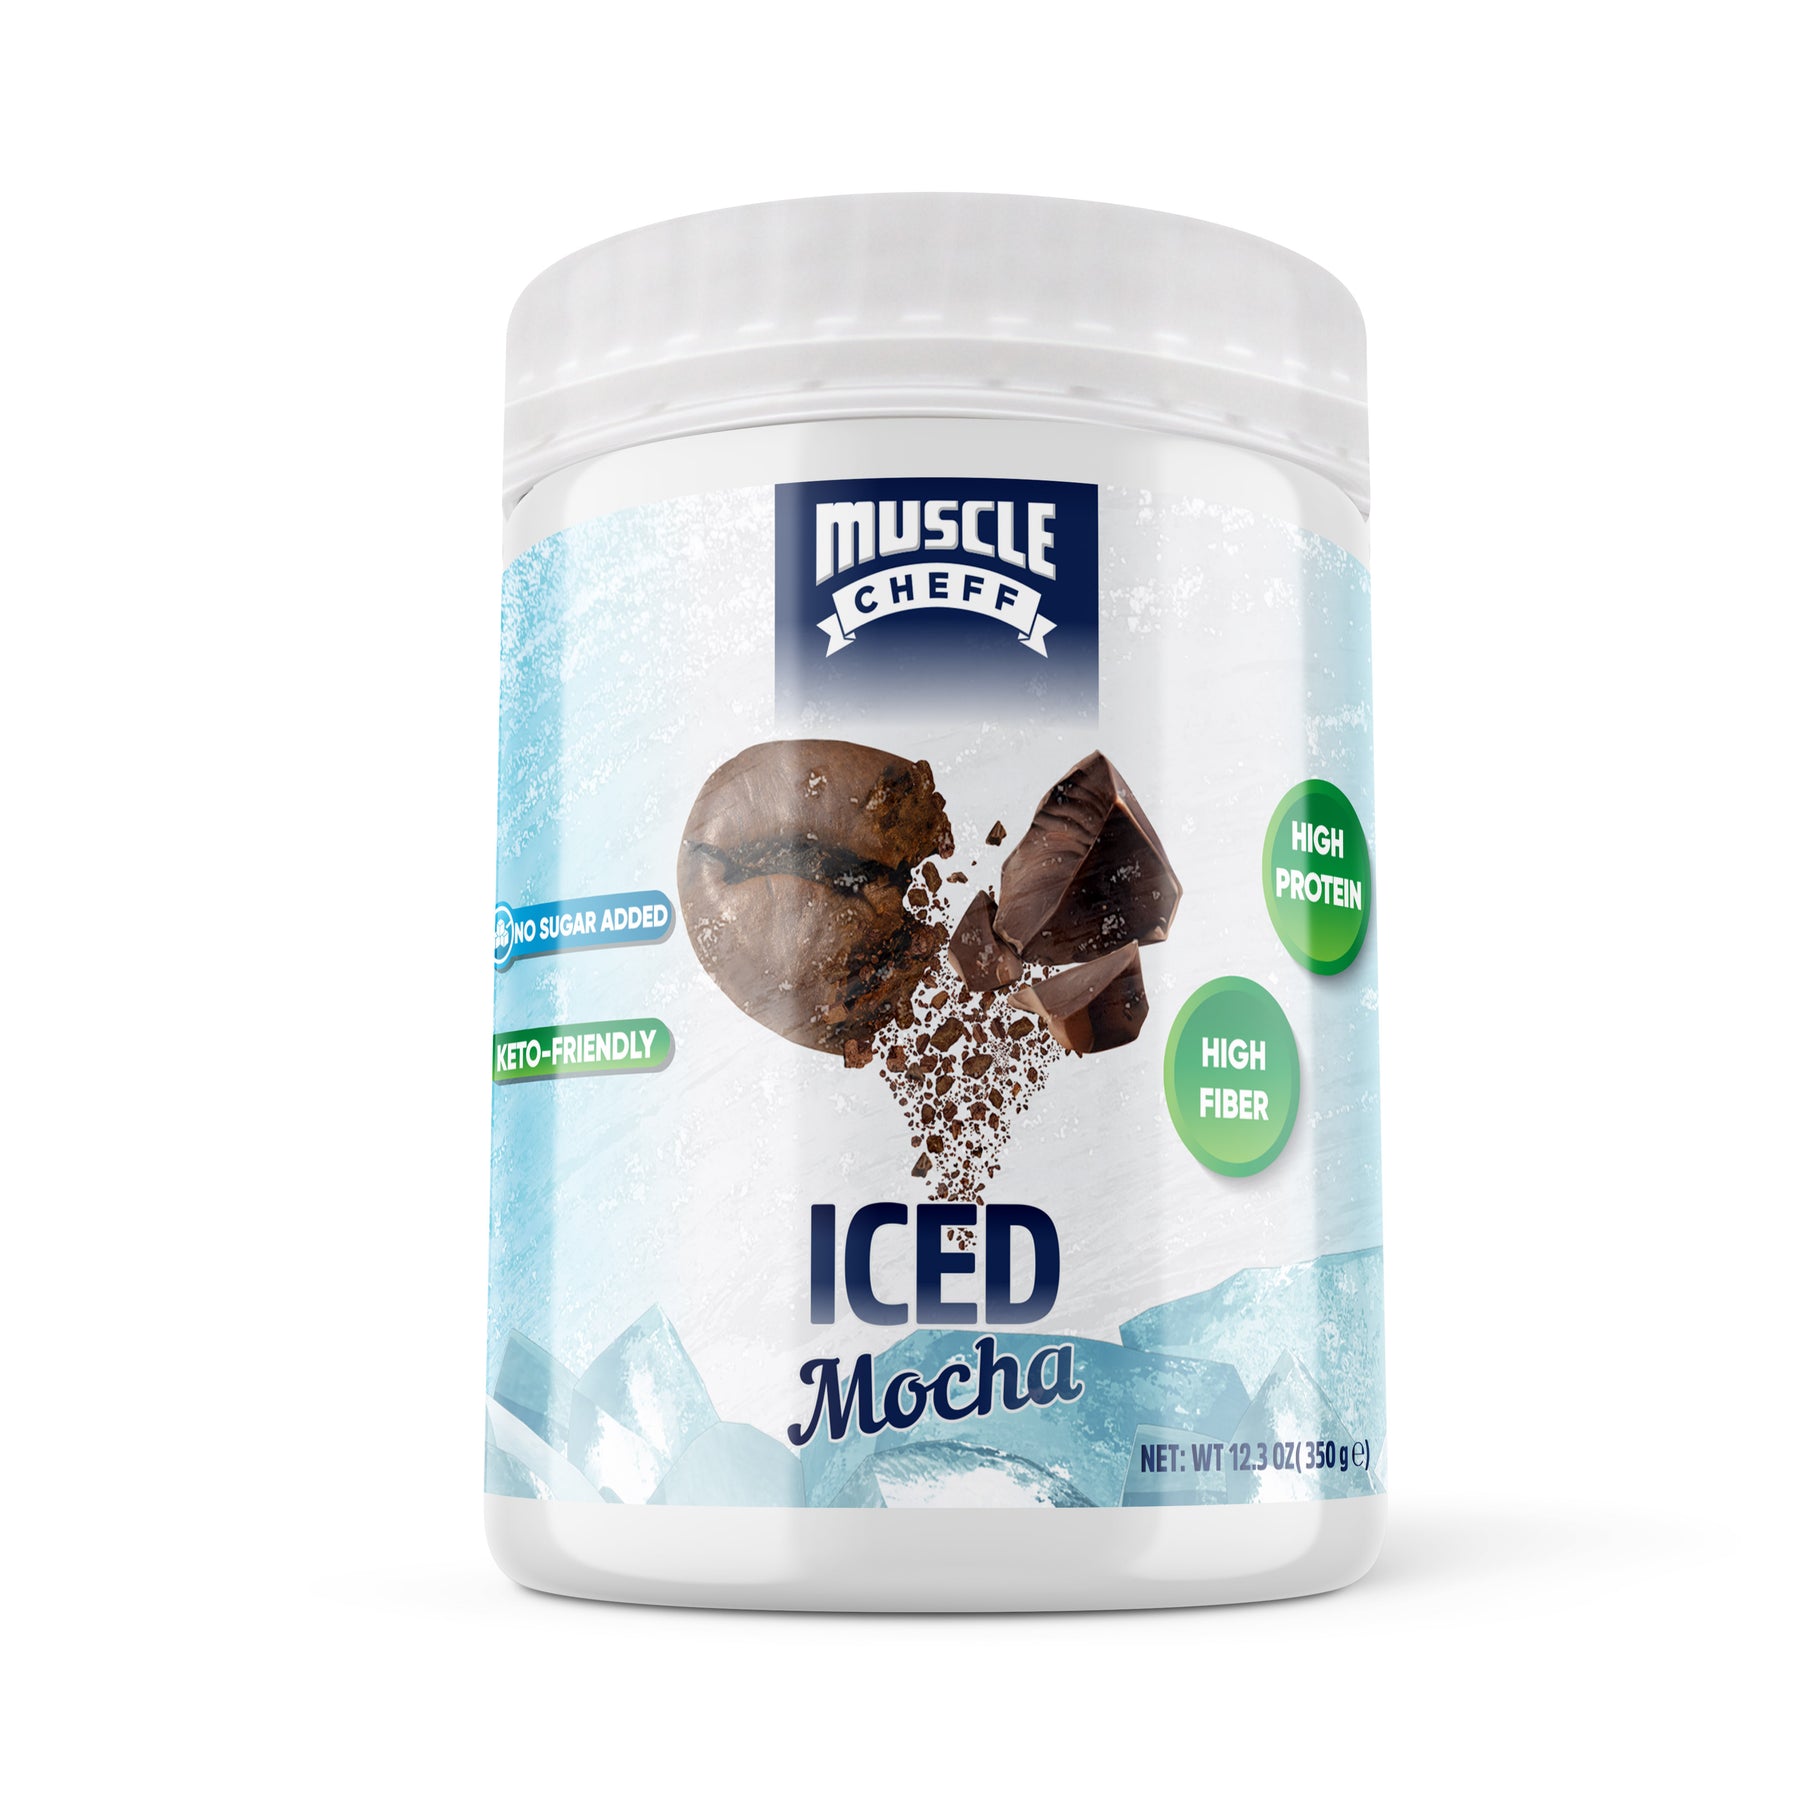 Muscle Cheff - Protein Iced Coffee Mocha -350g